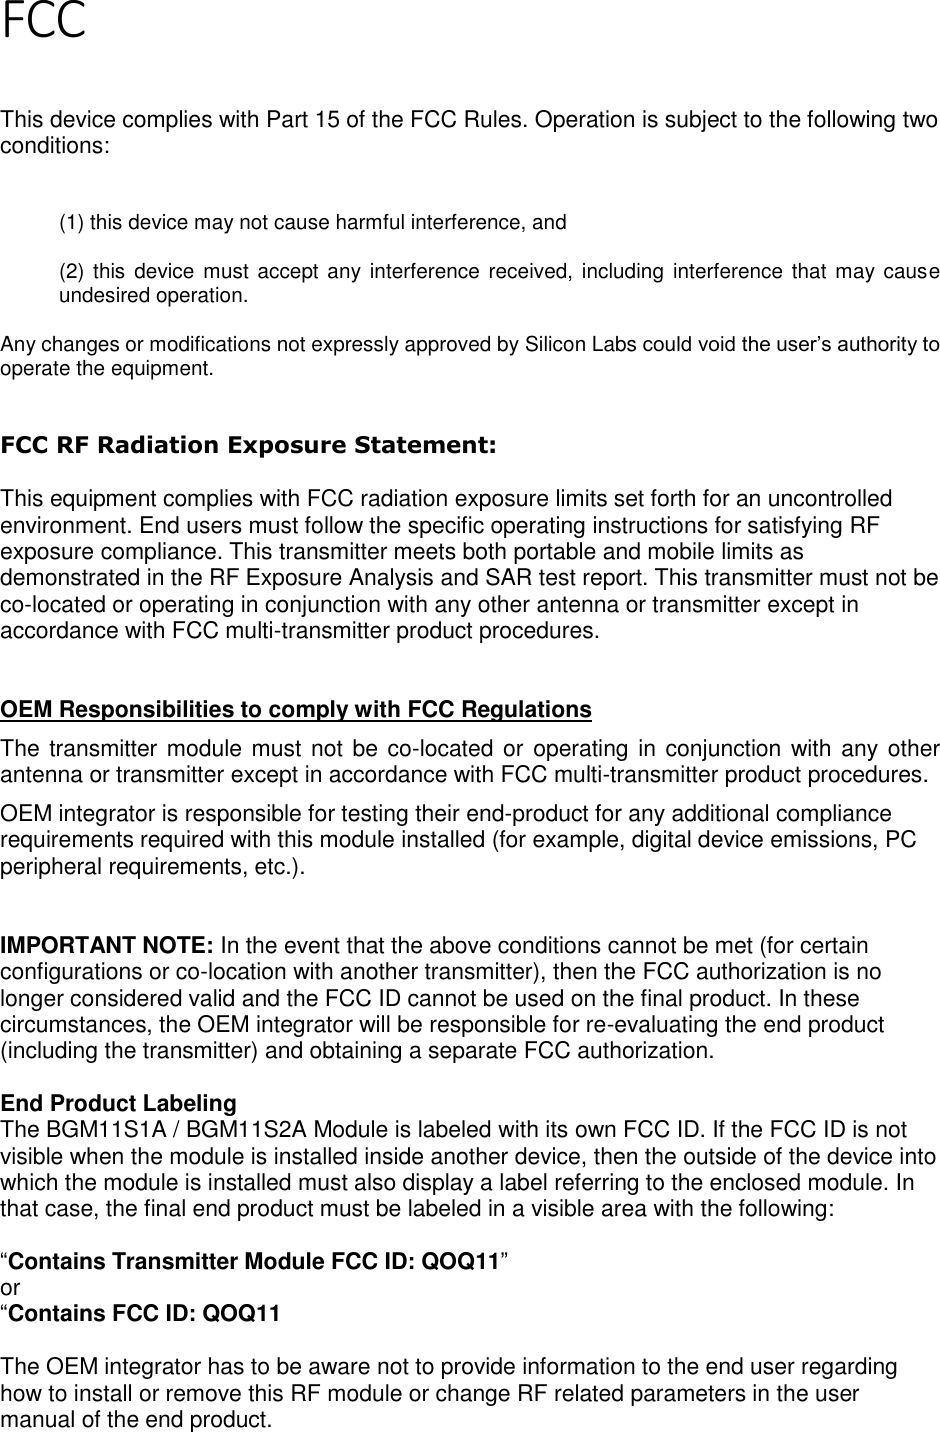 Page 3 of 5 FCC   This device complies with Part 15 of the FCC Rules. Operation is subject to the following two conditions:  (1) this device may not cause harmful interference, and  (2) this device  must accept any interference  received, including  interference that may cause undesired operation. Any changes or modifications not expressly approved by Silicon Labs could void the user’s authority to operate the equipment.  FCC RF Radiation Exposure Statement:  This equipment complies with FCC radiation exposure limits set forth for an uncontrolled environment. End users must follow the specific operating instructions for satisfying RF exposure compliance. This transmitter meets both portable and mobile limits as demonstrated in the RF Exposure Analysis and SAR test report. This transmitter must not be co-located or operating in conjunction with any other antenna or transmitter except in accordance with FCC multi-transmitter product procedures.    OEM Responsibilities to comply with FCC Regulations The transmitter module must not be co-located or operating in conjunction with any other antenna or transmitter except in accordance with FCC multi-transmitter product procedures.  OEM integrator is responsible for testing their end-product for any additional compliance requirements required with this module installed (for example, digital device emissions, PC peripheral requirements, etc.).   IMPORTANT NOTE: In the event that the above conditions cannot be met (for certain configurations or co-location with another transmitter), then the FCC authorization is no longer considered valid and the FCC ID cannot be used on the final product. In these circumstances, the OEM integrator will be responsible for re-evaluating the end product (including the transmitter) and obtaining a separate FCC authorization.  End Product Labeling The BGM11S1A / BGM11S2A Module is labeled with its own FCC ID. If the FCC ID is not visible when the module is installed inside another device, then the outside of the device into which the module is installed must also display a label referring to the enclosed module. In that case, the final end product must be labeled in a visible area with the following:  “Contains Transmitter Module FCC ID: QOQ11” or  “Contains FCC ID: QOQ11  The OEM integrator has to be aware not to provide information to the end user regarding how to install or remove this RF module or change RF related parameters in the user manual of the end product.  